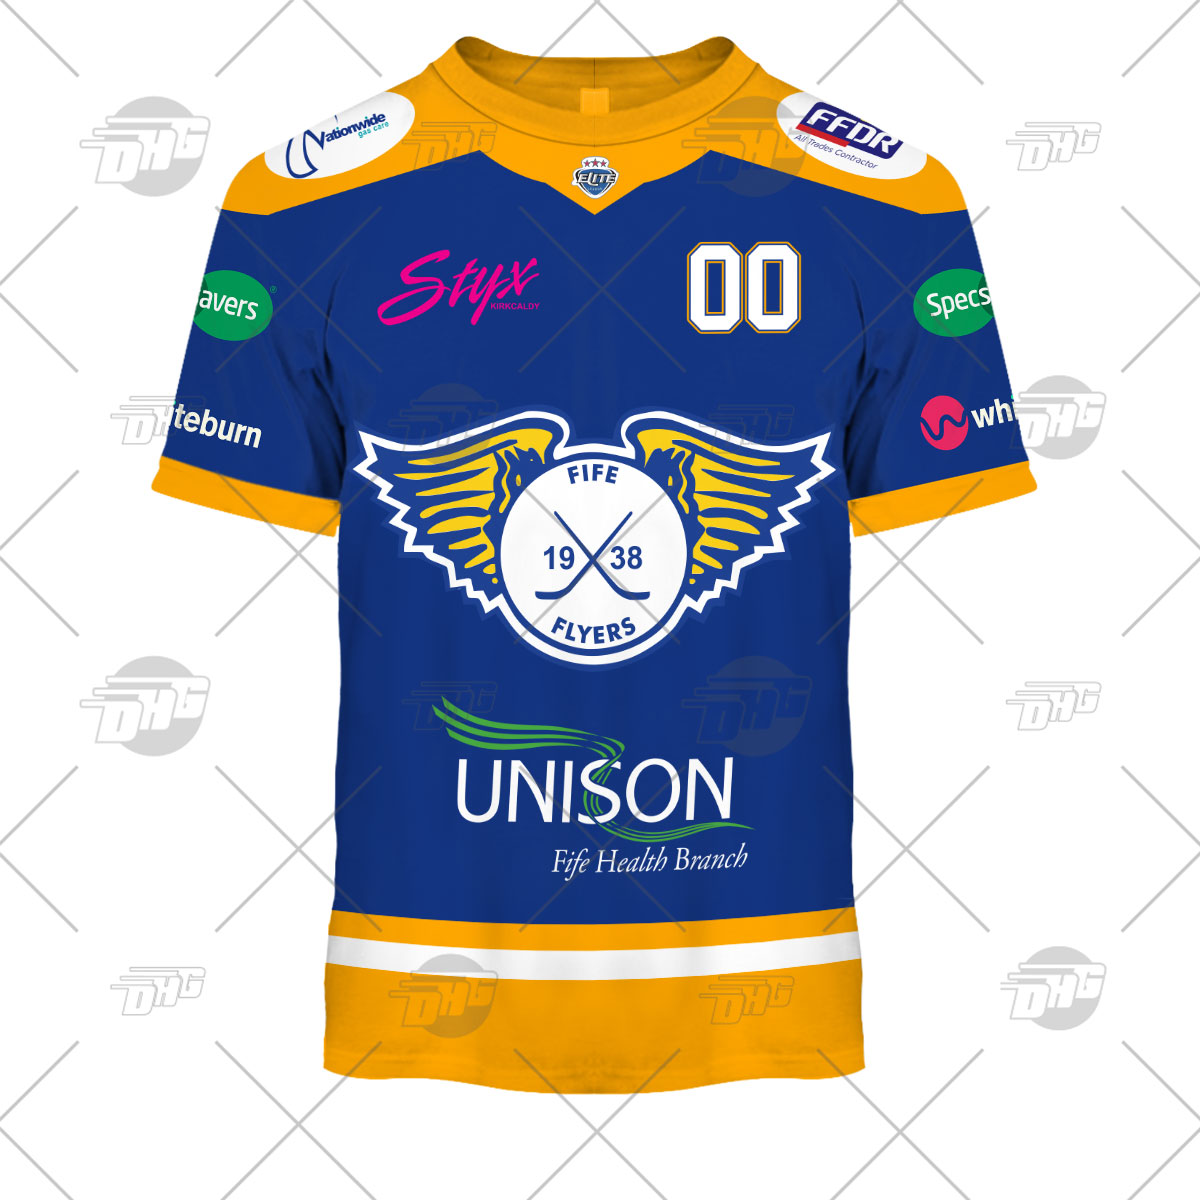 Fife Flyers on X: Thank you to everyone who attended our jersey